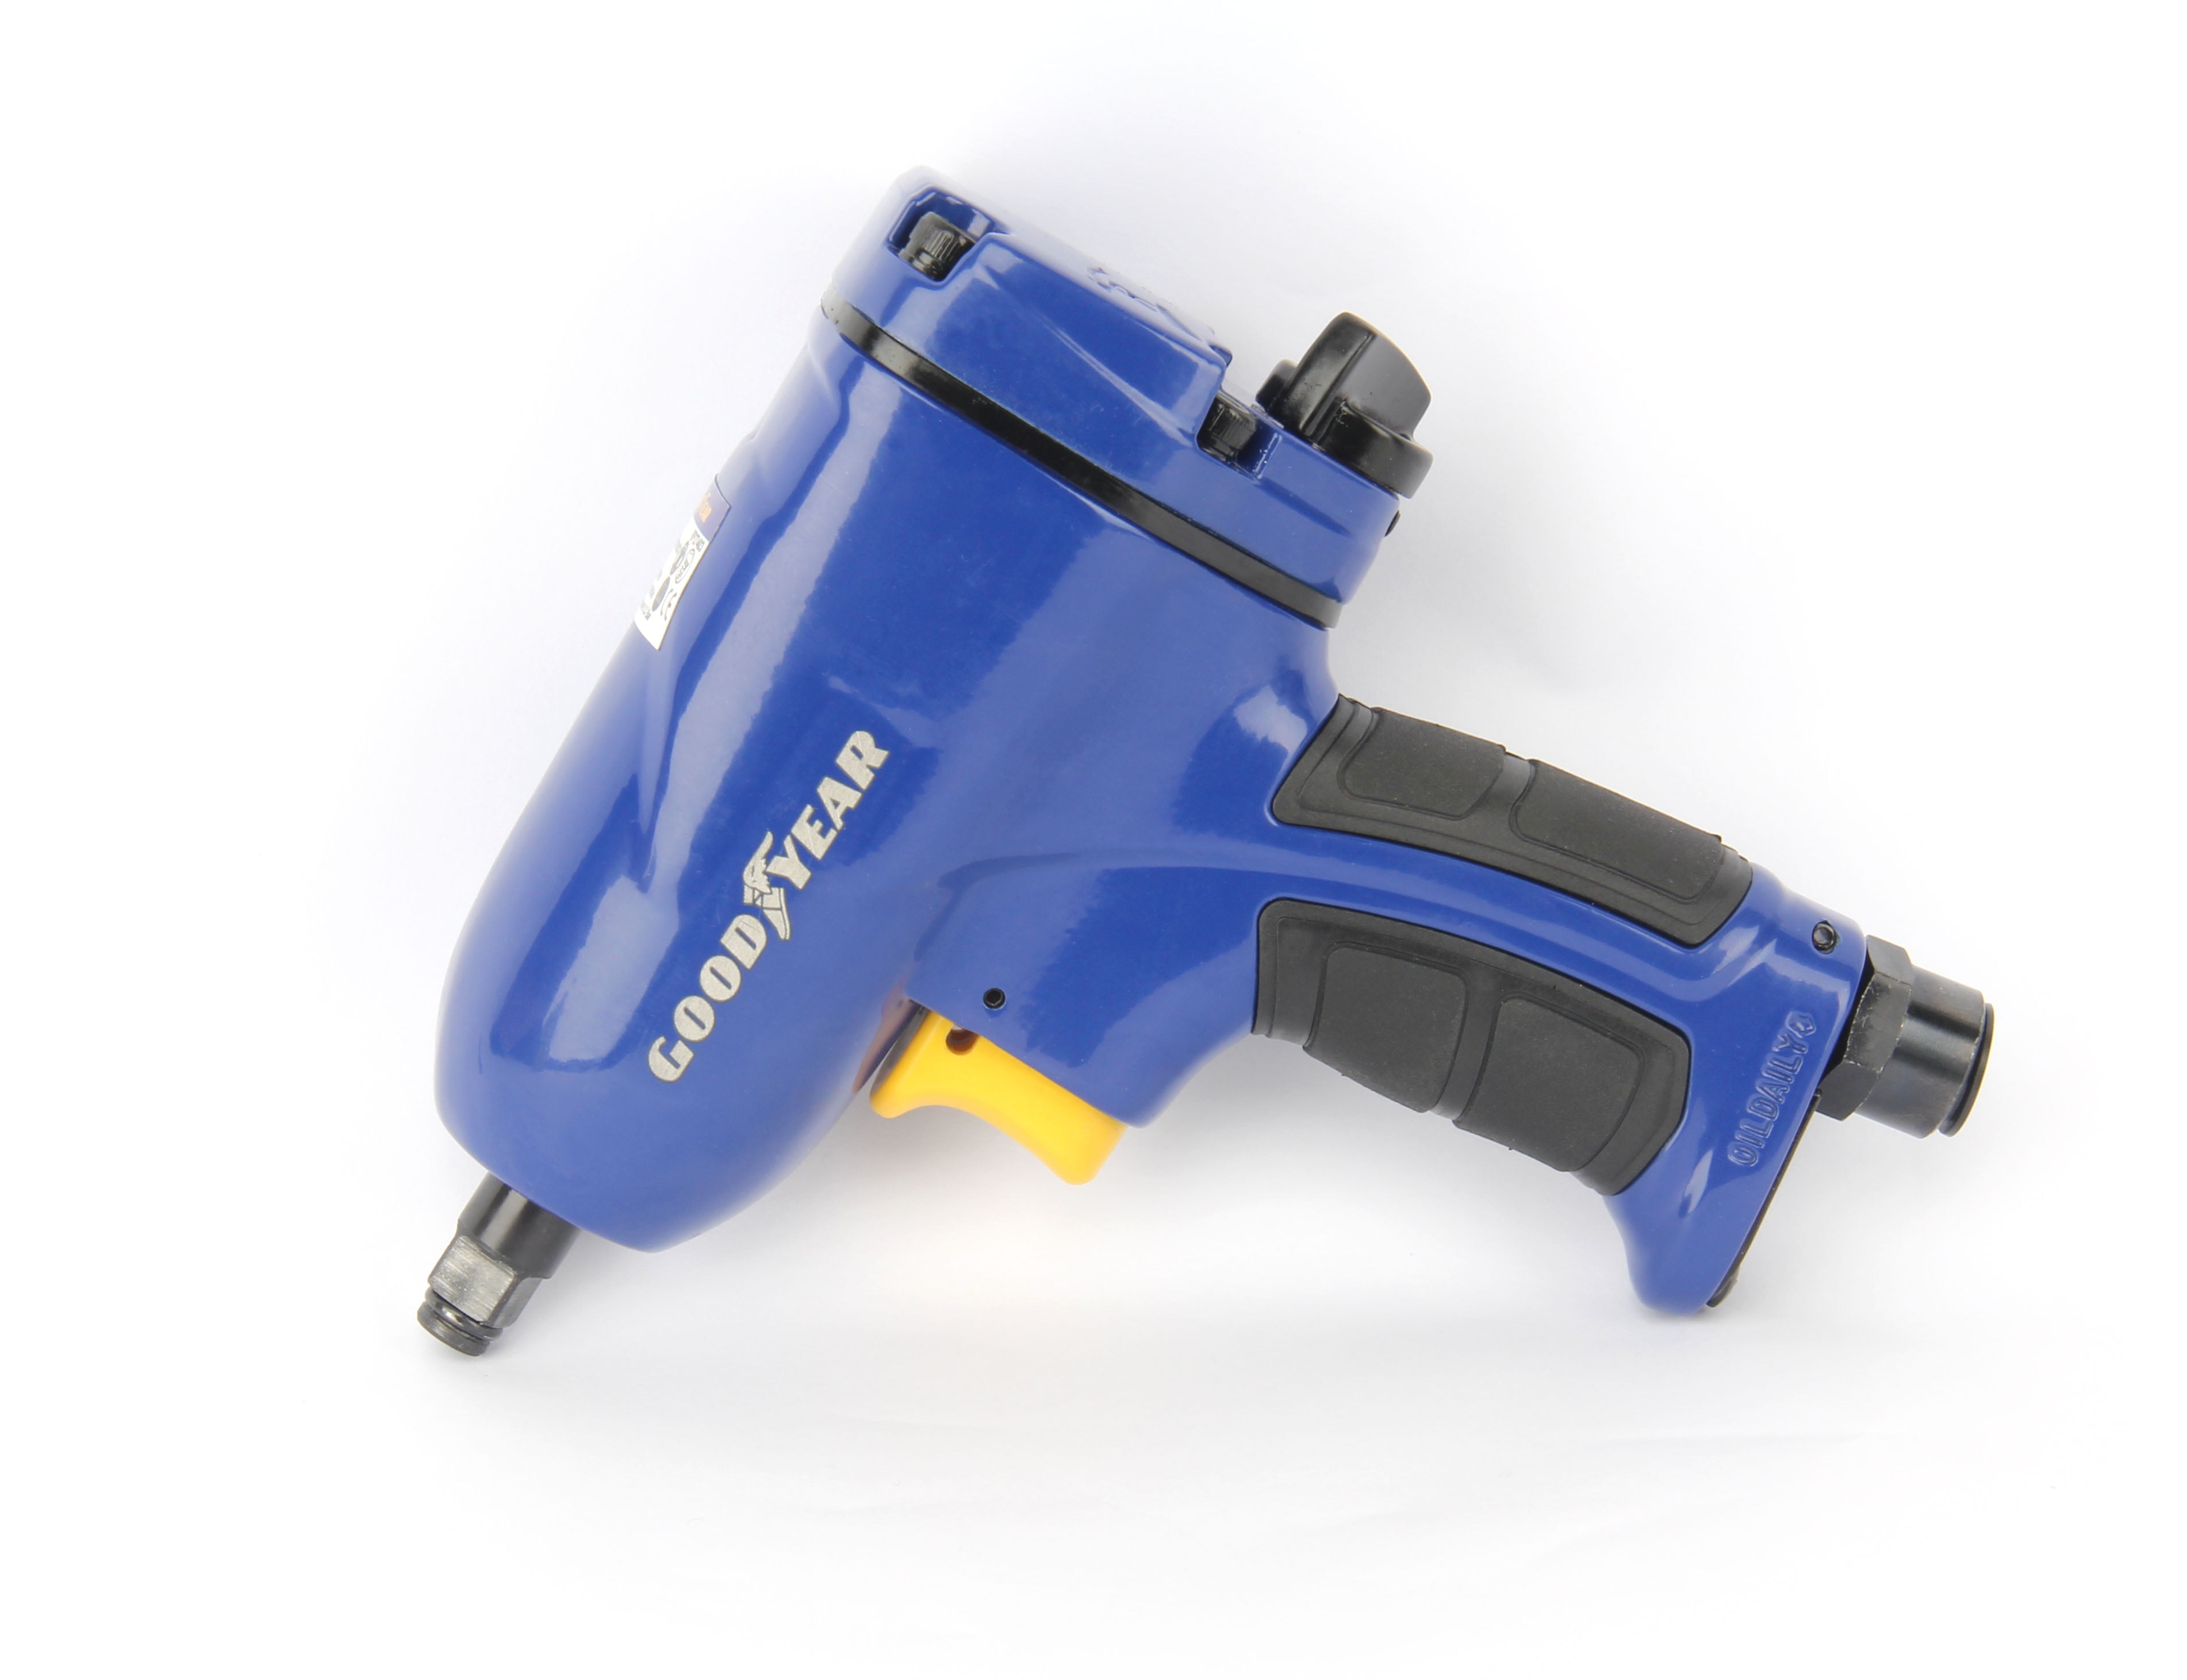 GOODYEAR. 3/8-inch Impact Wrench. 100 Foot Pounds of Torque Air Tool -  Walmart.com